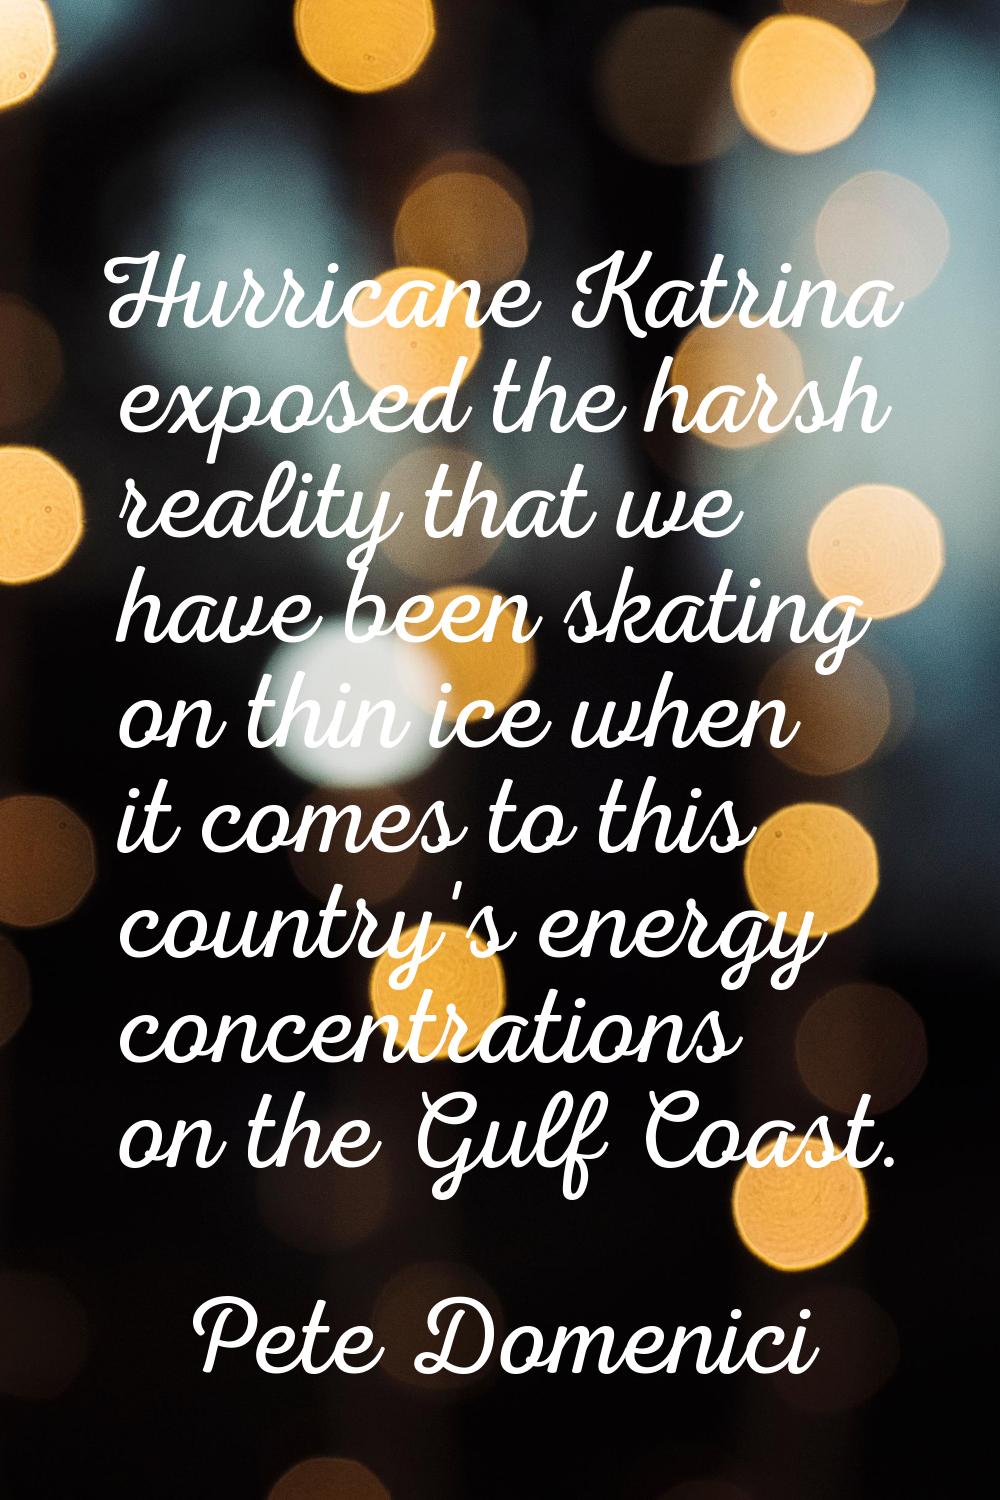 Hurricane Katrina exposed the harsh reality that we have been skating on thin ice when it comes to 